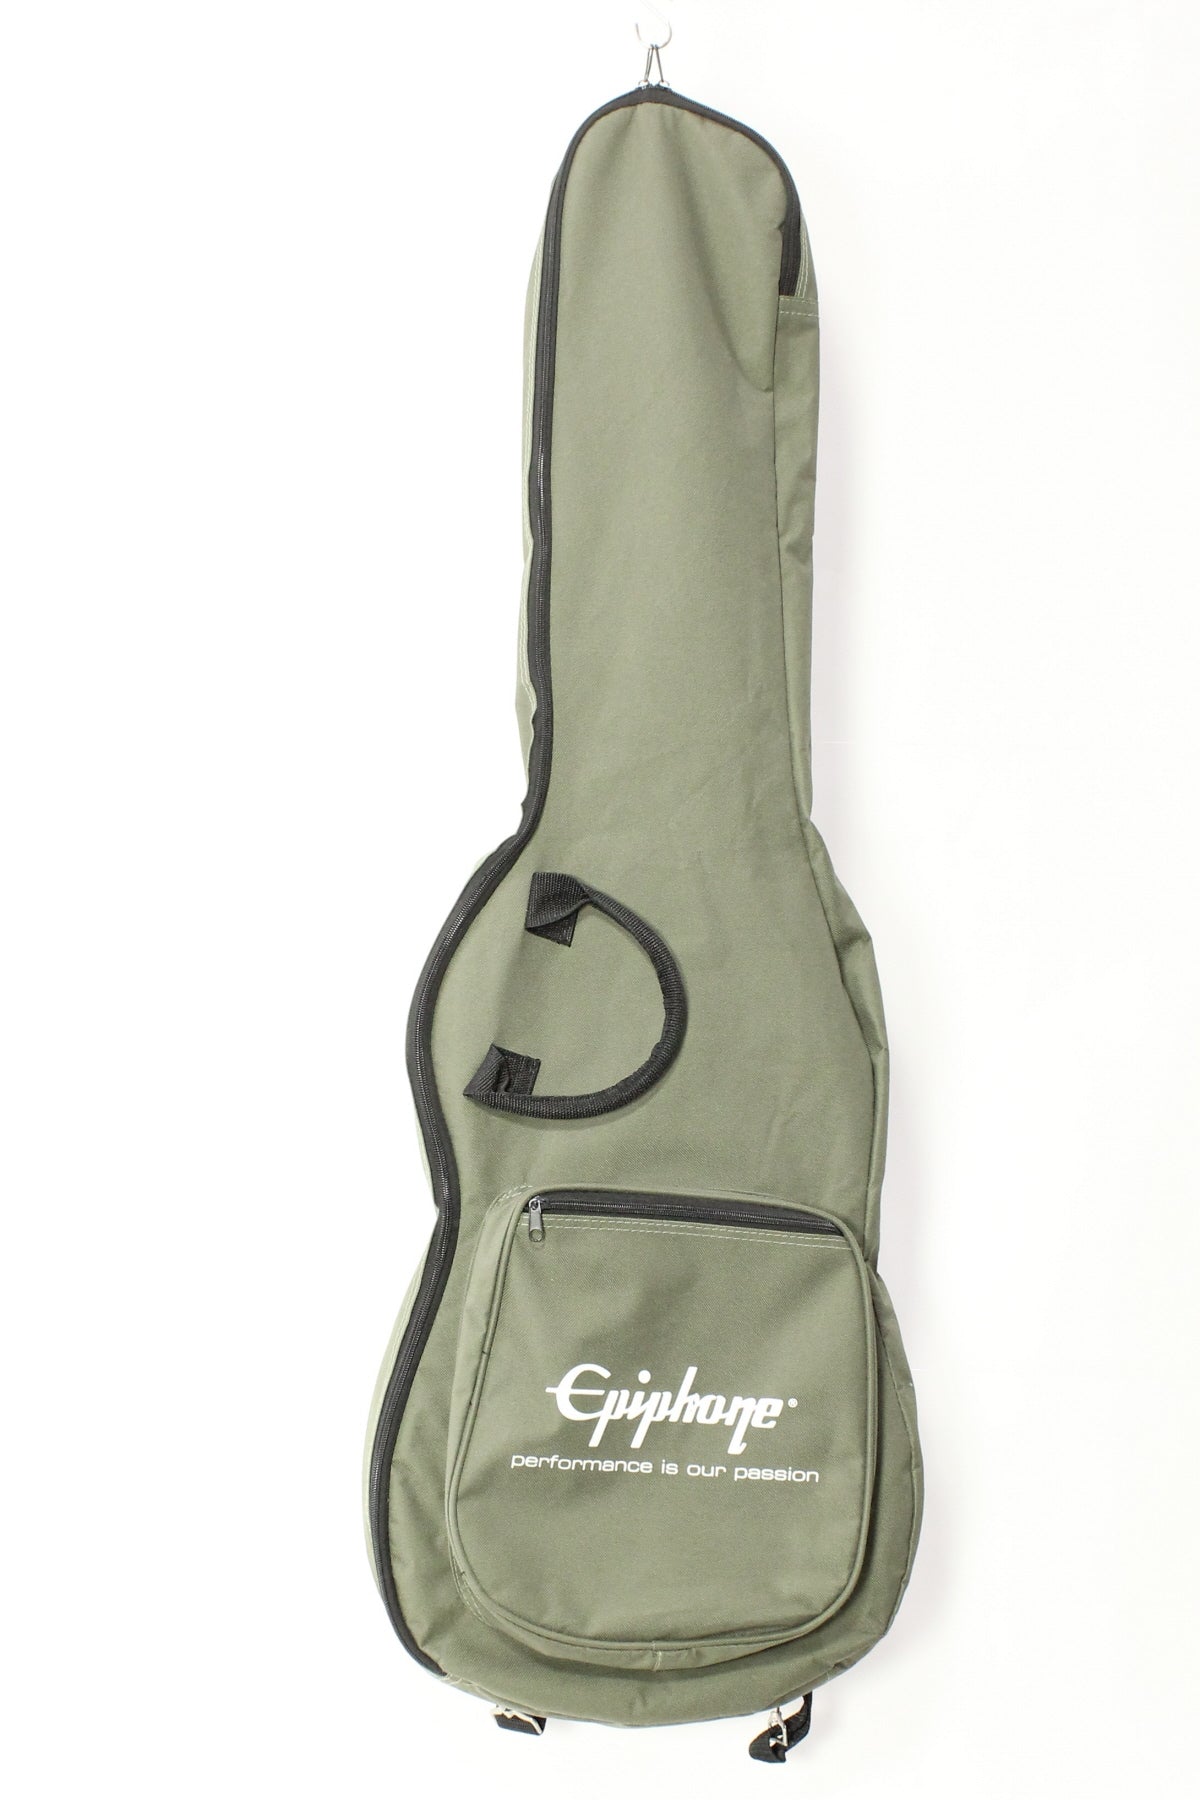 [SN 14051503570] USED Epiphone / Casino Coupe Cherry [06]